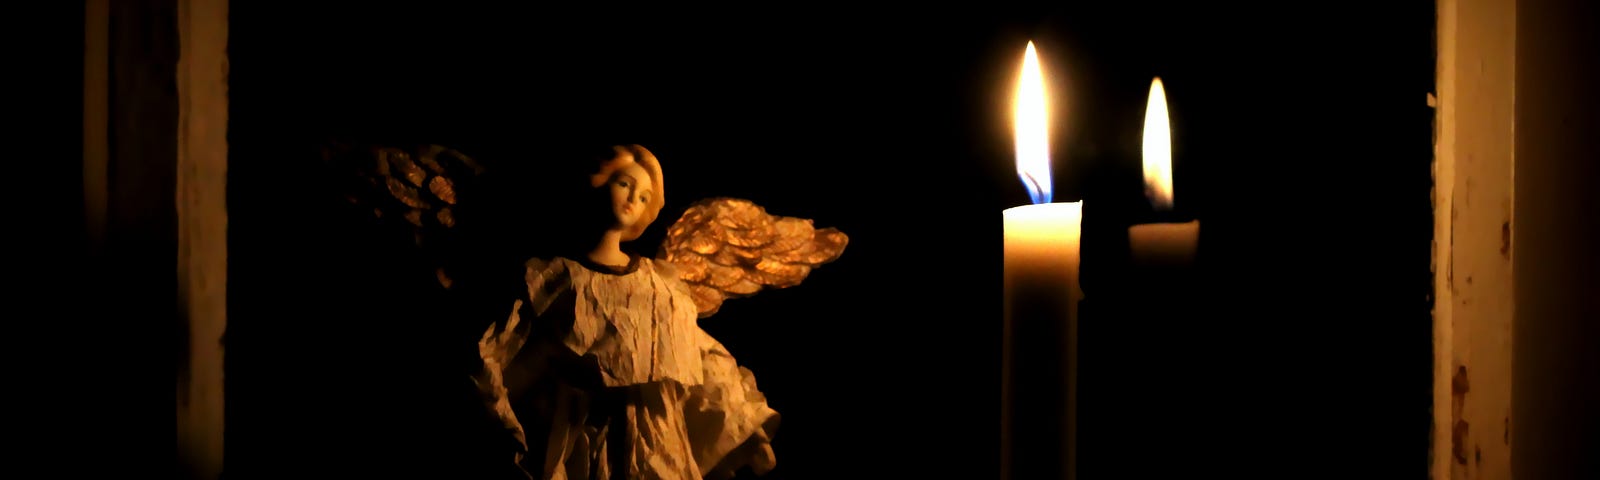 An angel figurine against darkness with two candles casting just enough light to see.